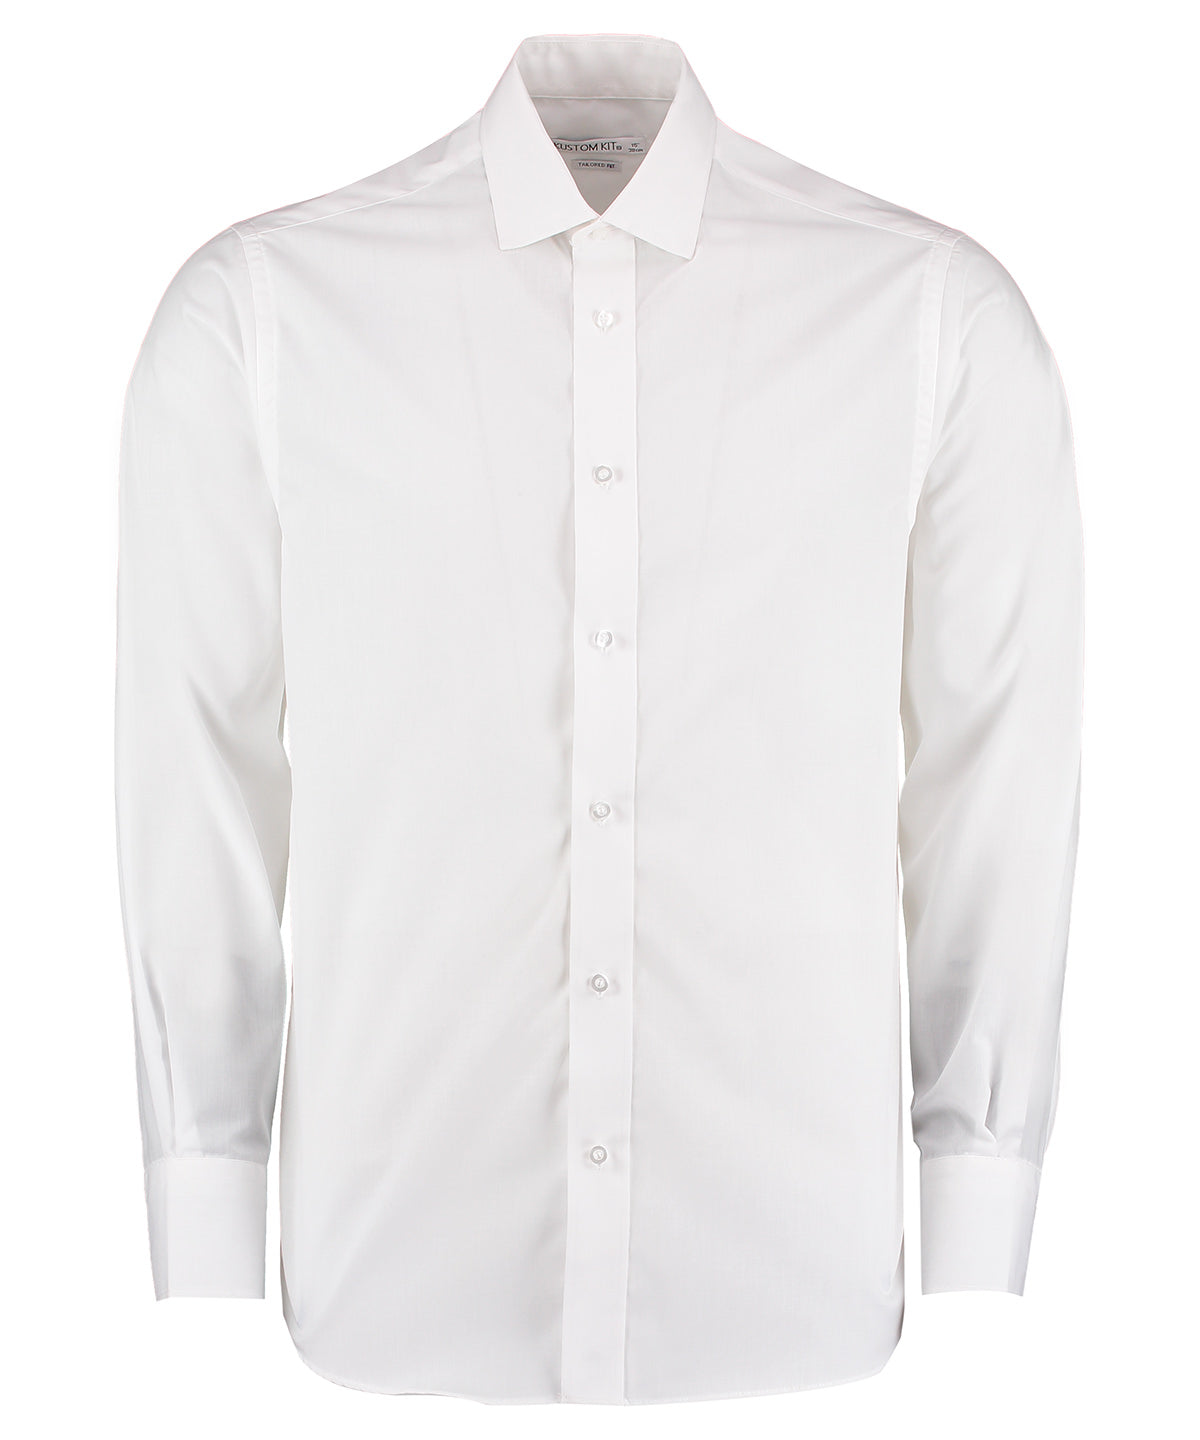 Bolir - Tailored Business Shirt Long-sleeved (tailored Fit)